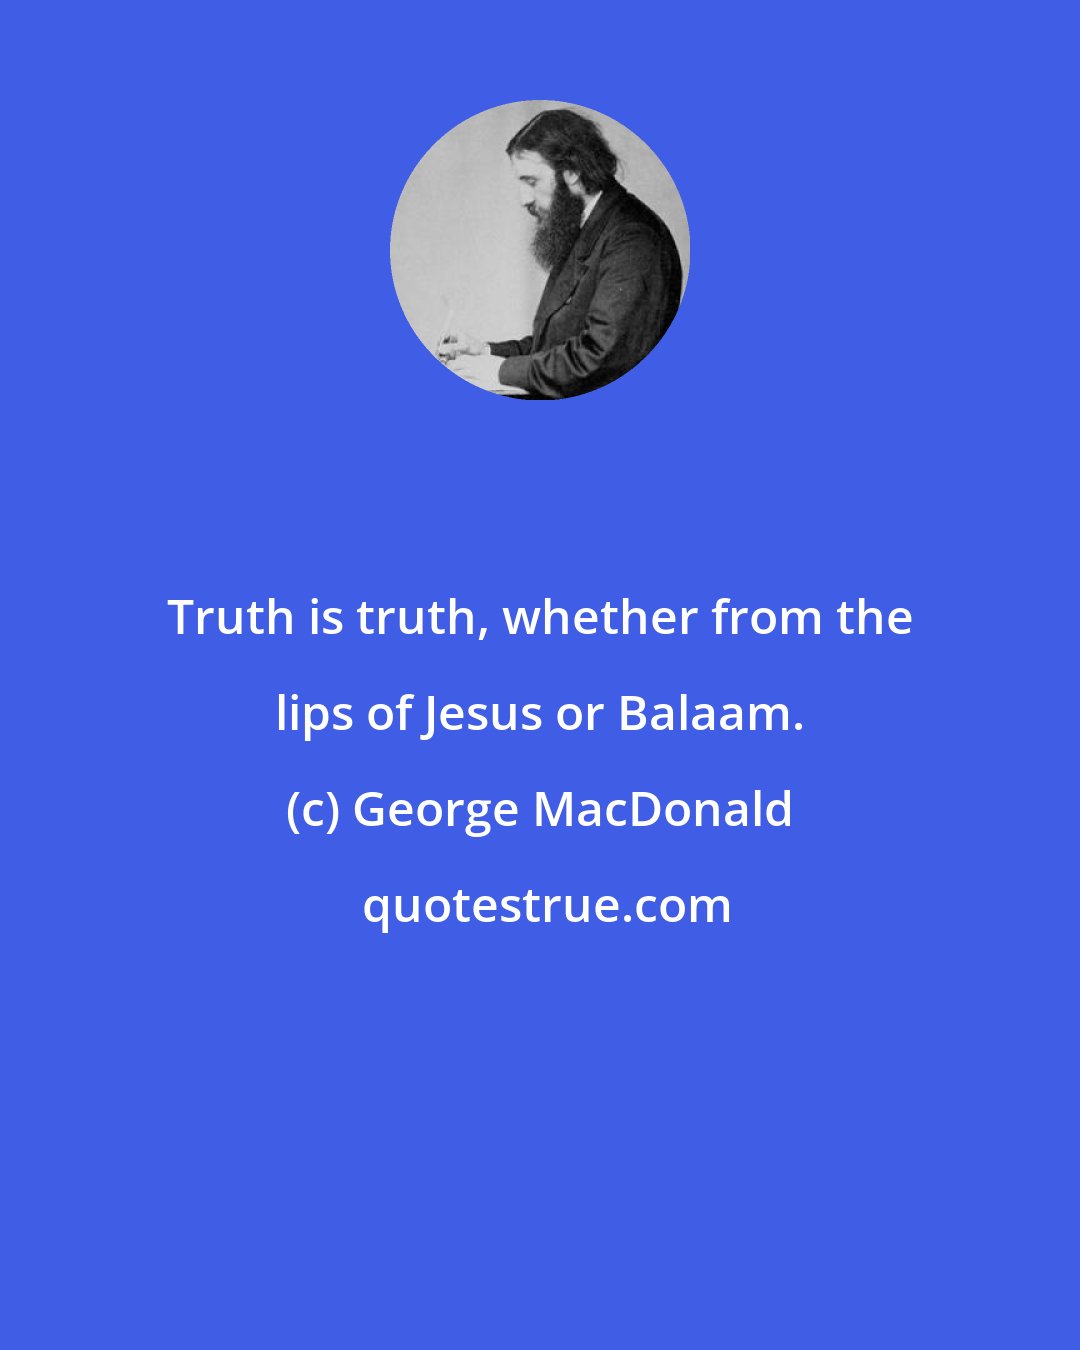 George MacDonald: Truth is truth, whether from the lips of Jesus or Balaam.